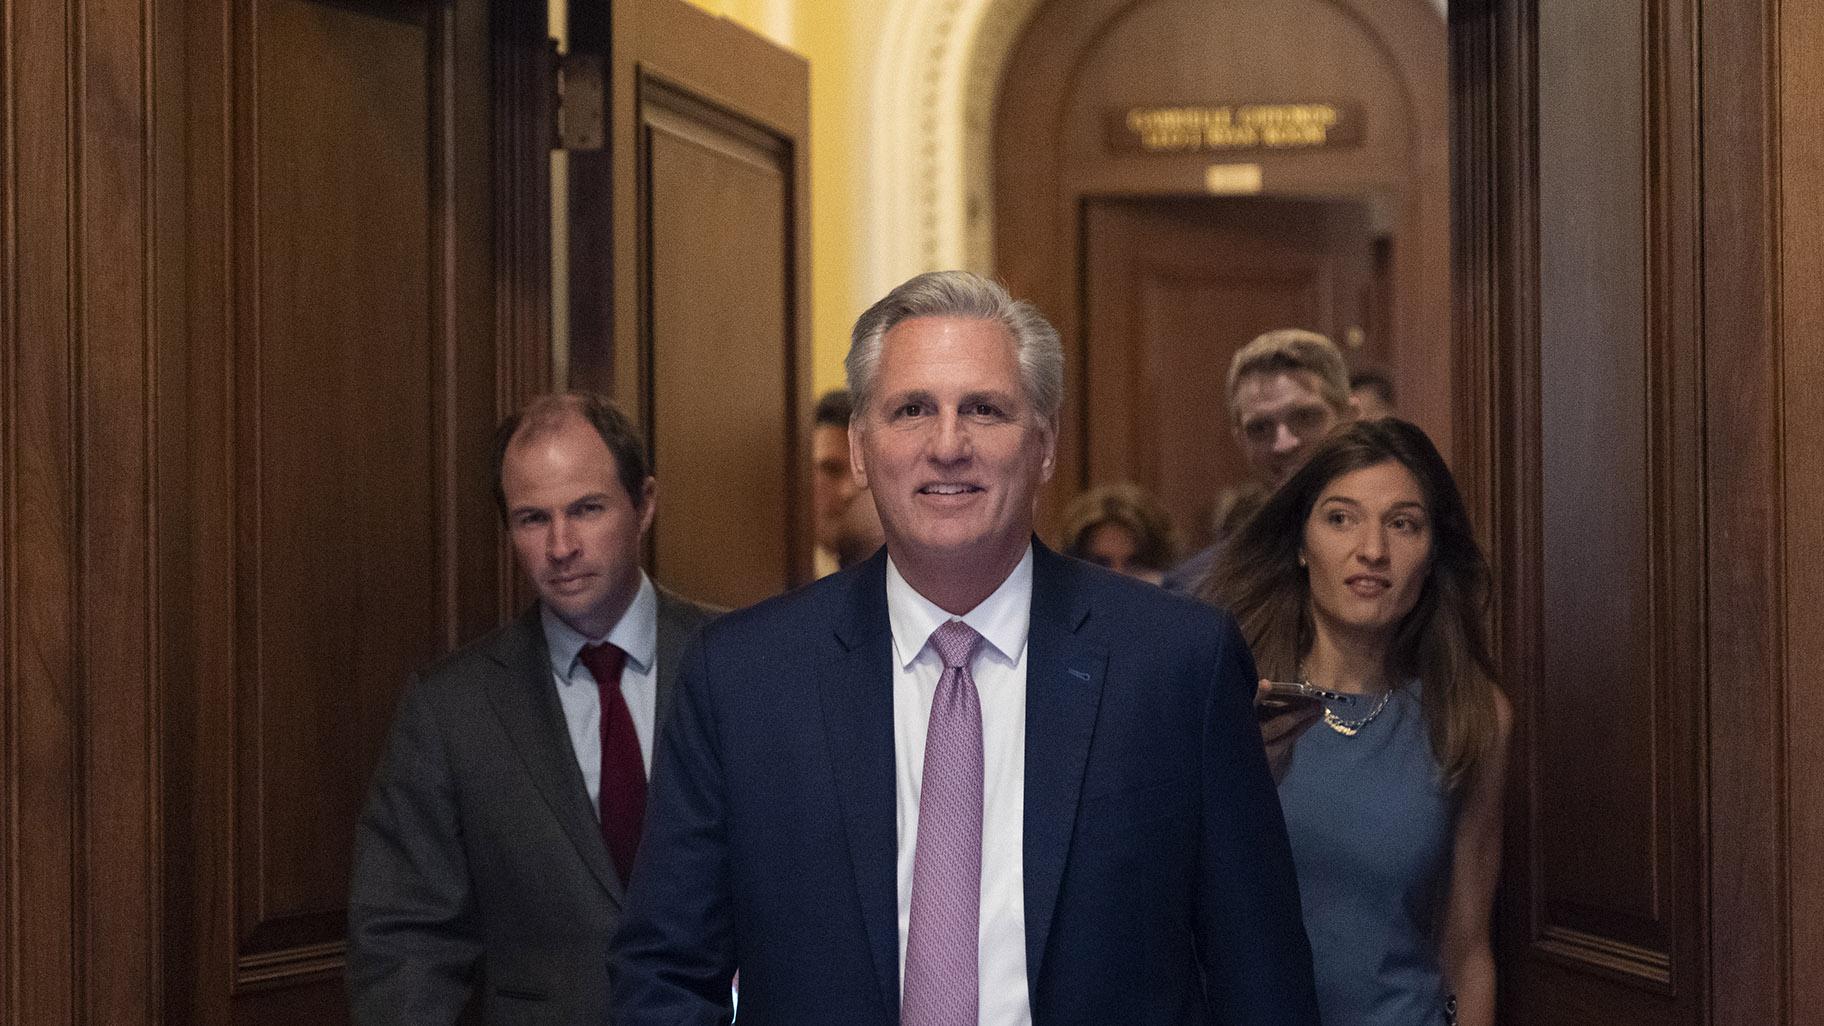 House Minority Leader Kevin McCarthy of Calif., center, leaves the floor after the House voted to create a select committee to investigate the Jan. 6 insurrection, at the Capitol in Washington, Wednesday, June 30, 2021. (AP Photo / Alex Brandon)